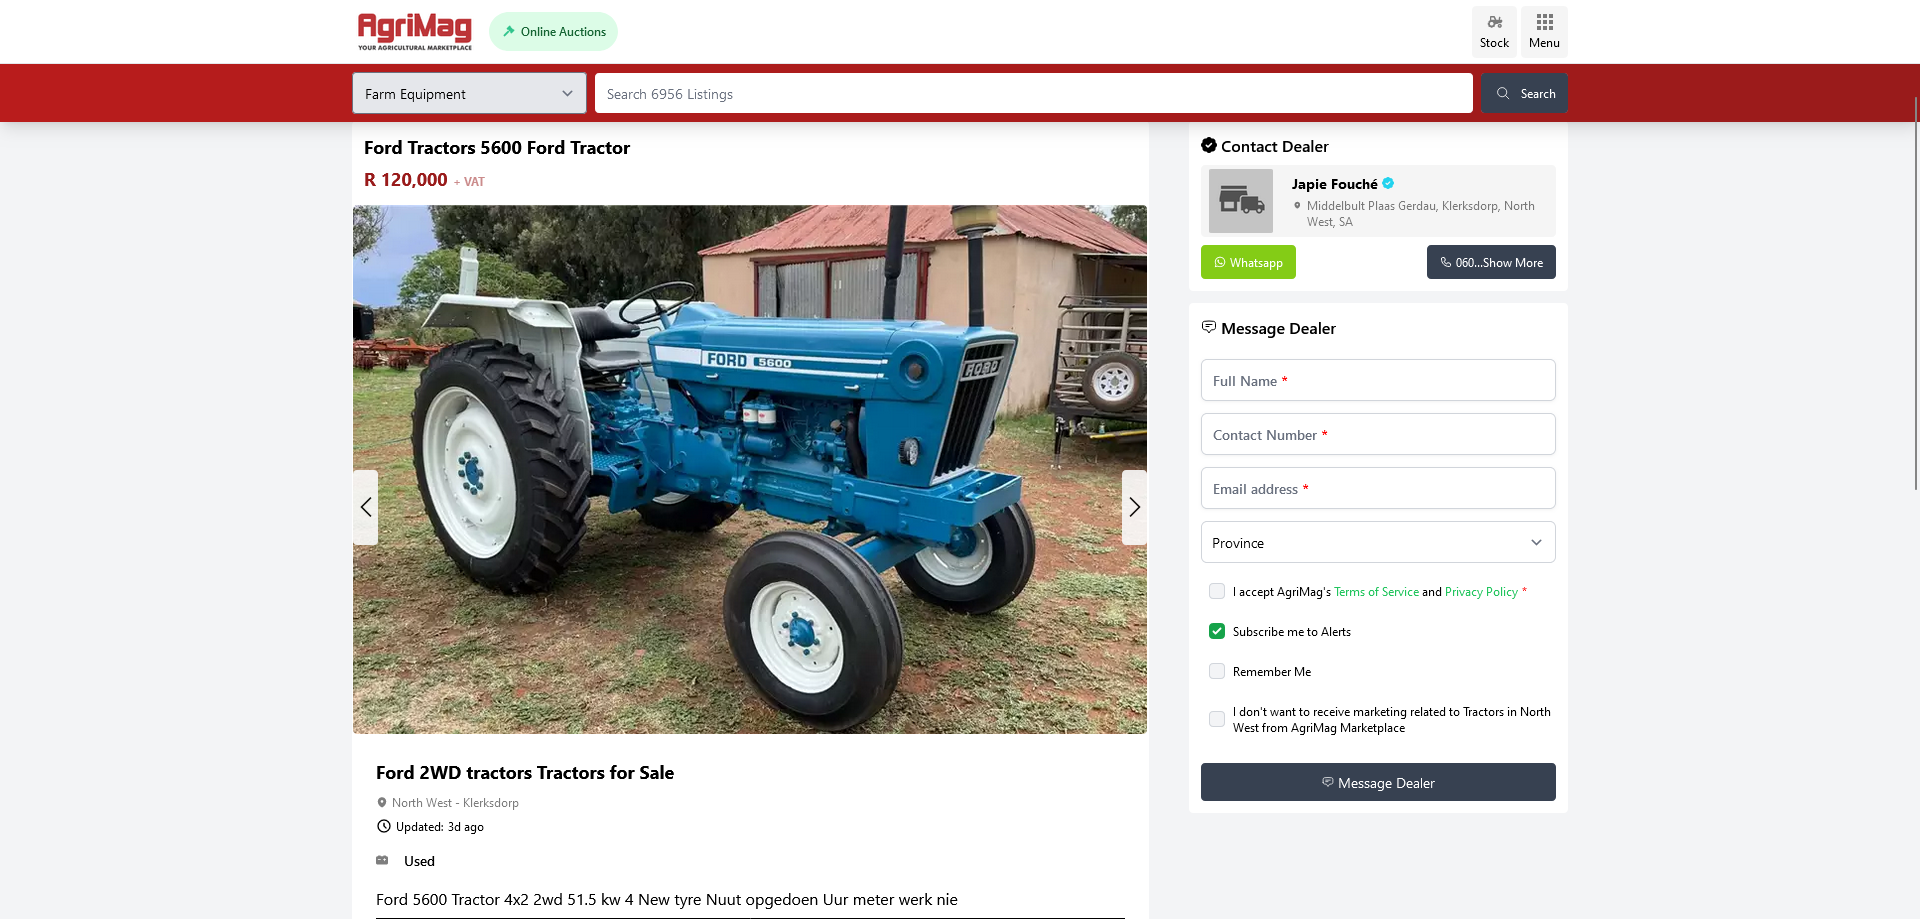 AgriMag, Farming, Spares and parts, Spares, Parts, Farming Equipment, AgriMag Marketplace, Photography, Product Photo.png